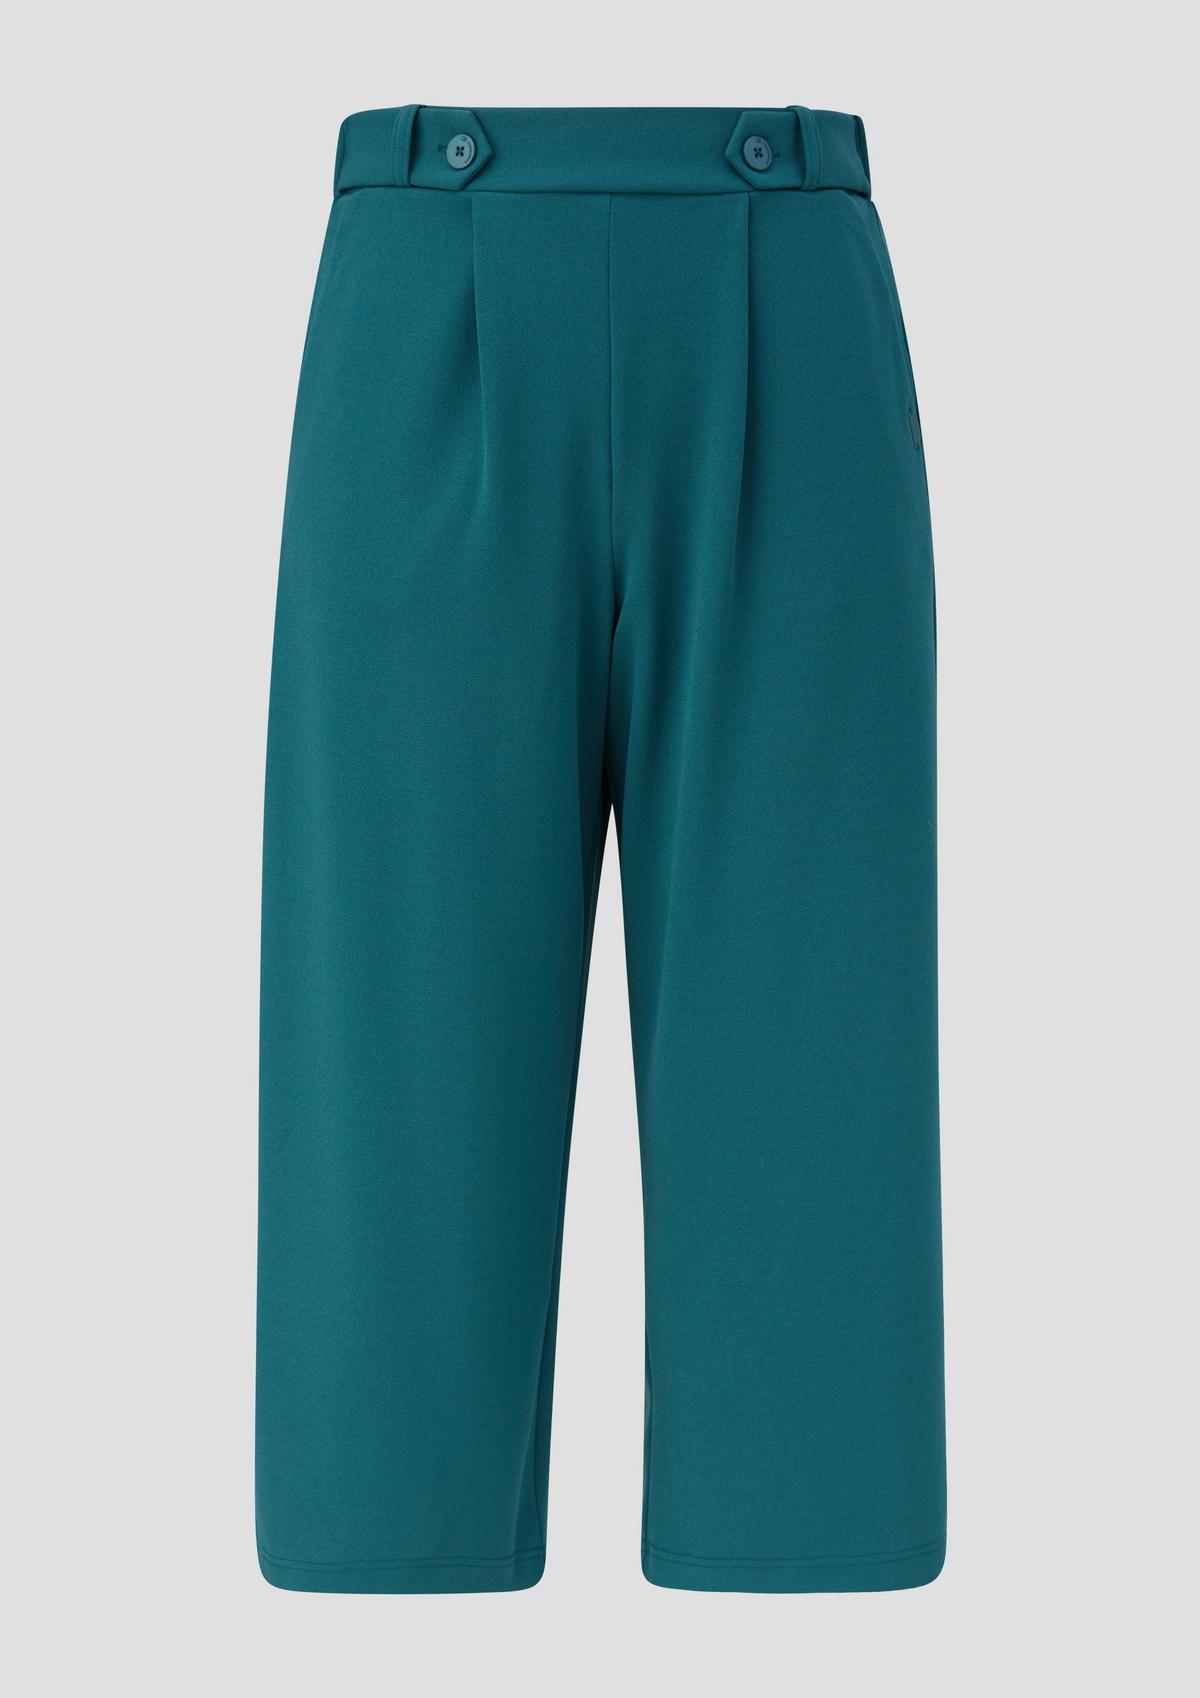 s.Oliver Culottes made of interlock jersey